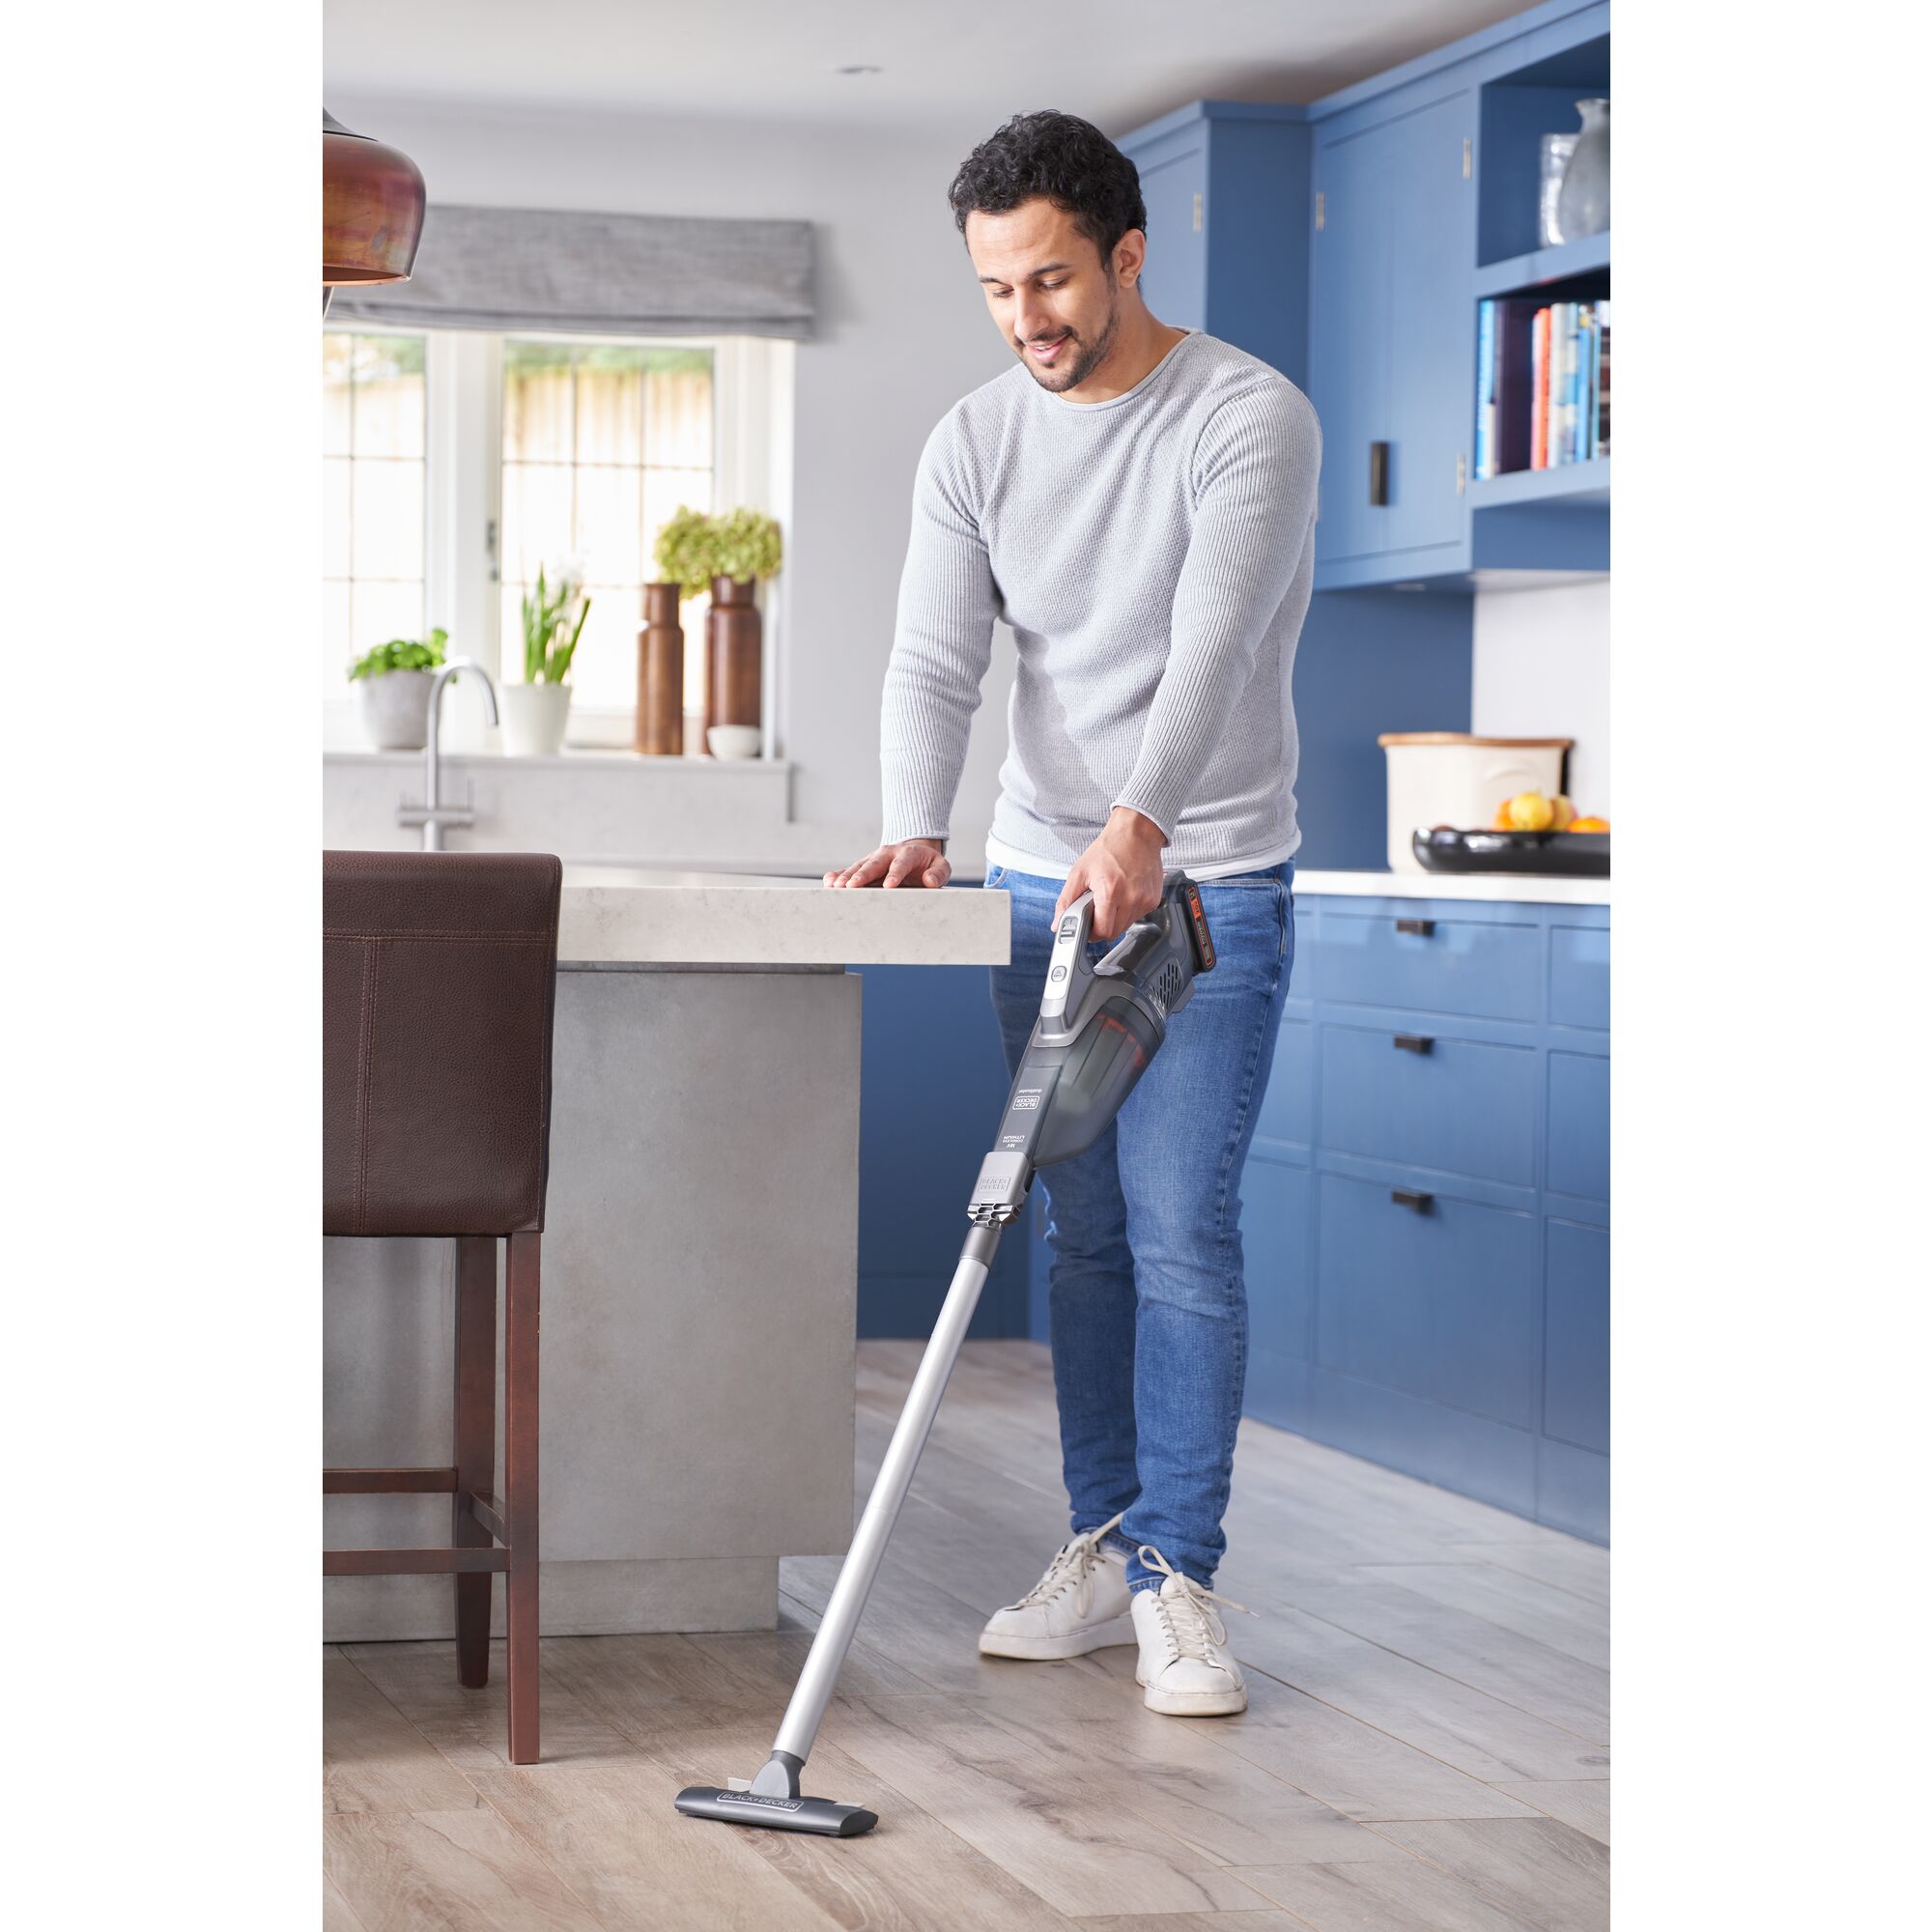 Person using Black and Decker Dustbuster 20V MAX* POWERCONNECT Cordless Handheld Vacuum to clean up mess from a kitchen floor